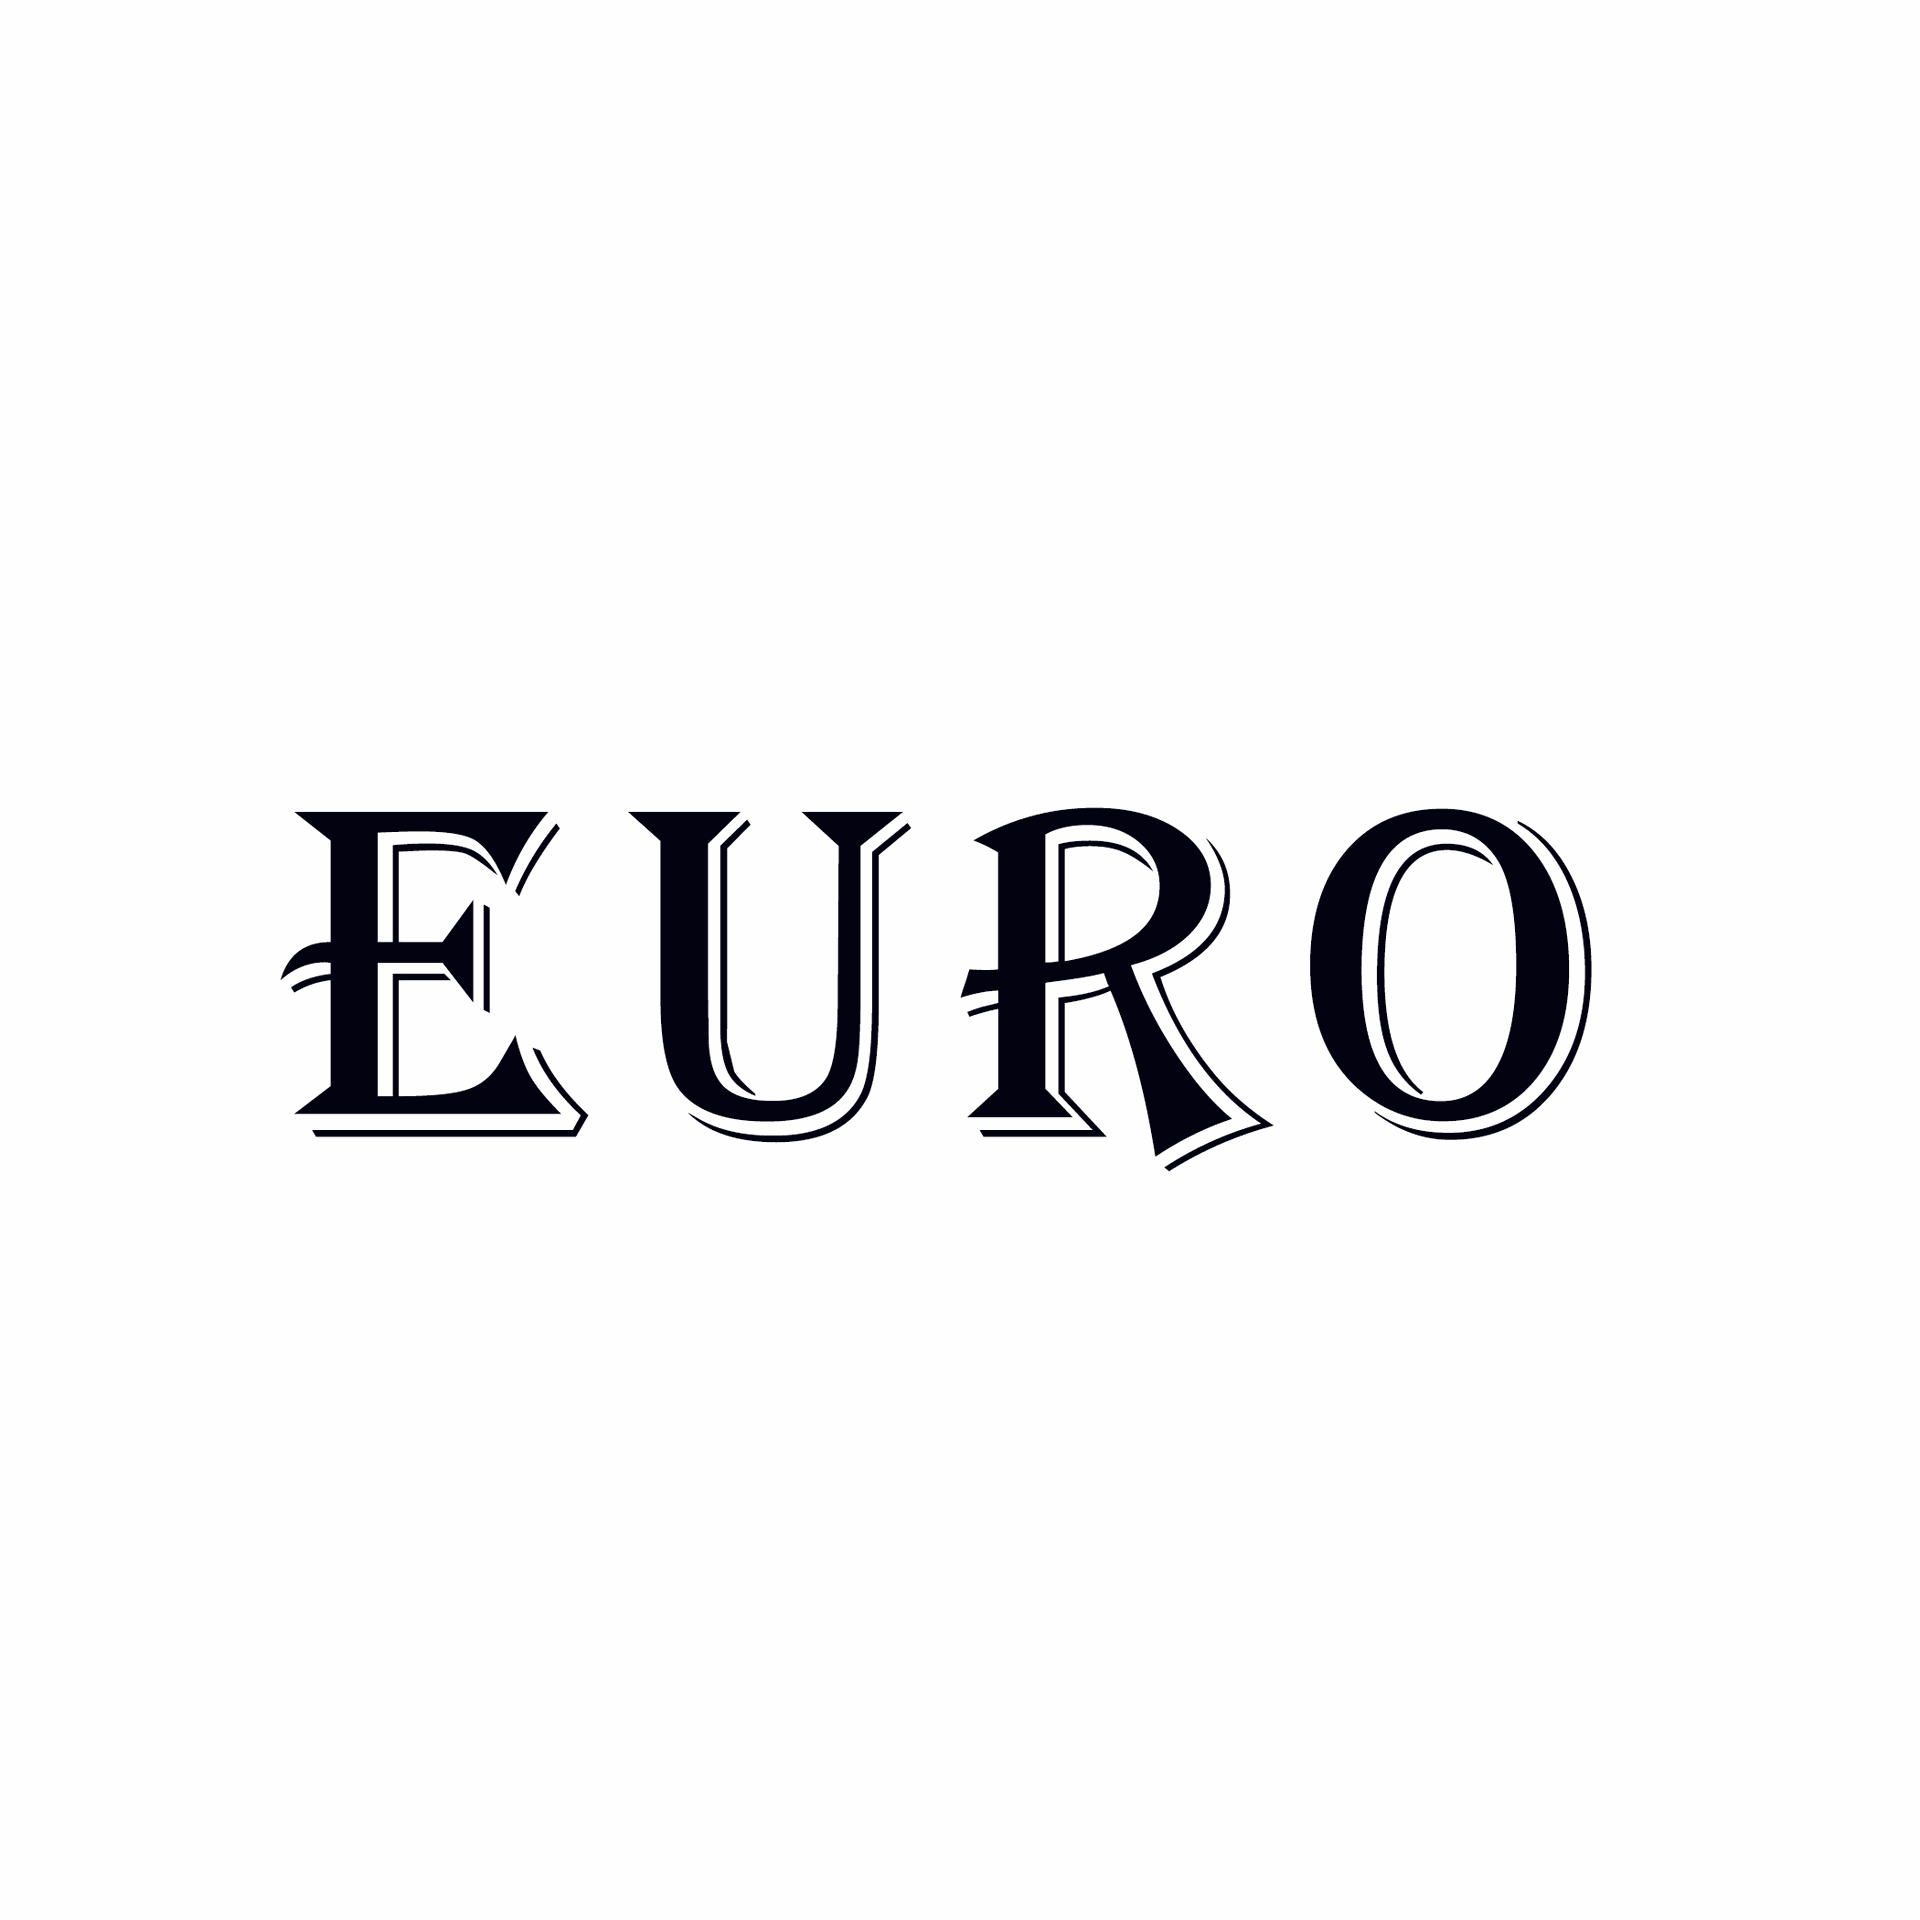 Product Brand: EURO